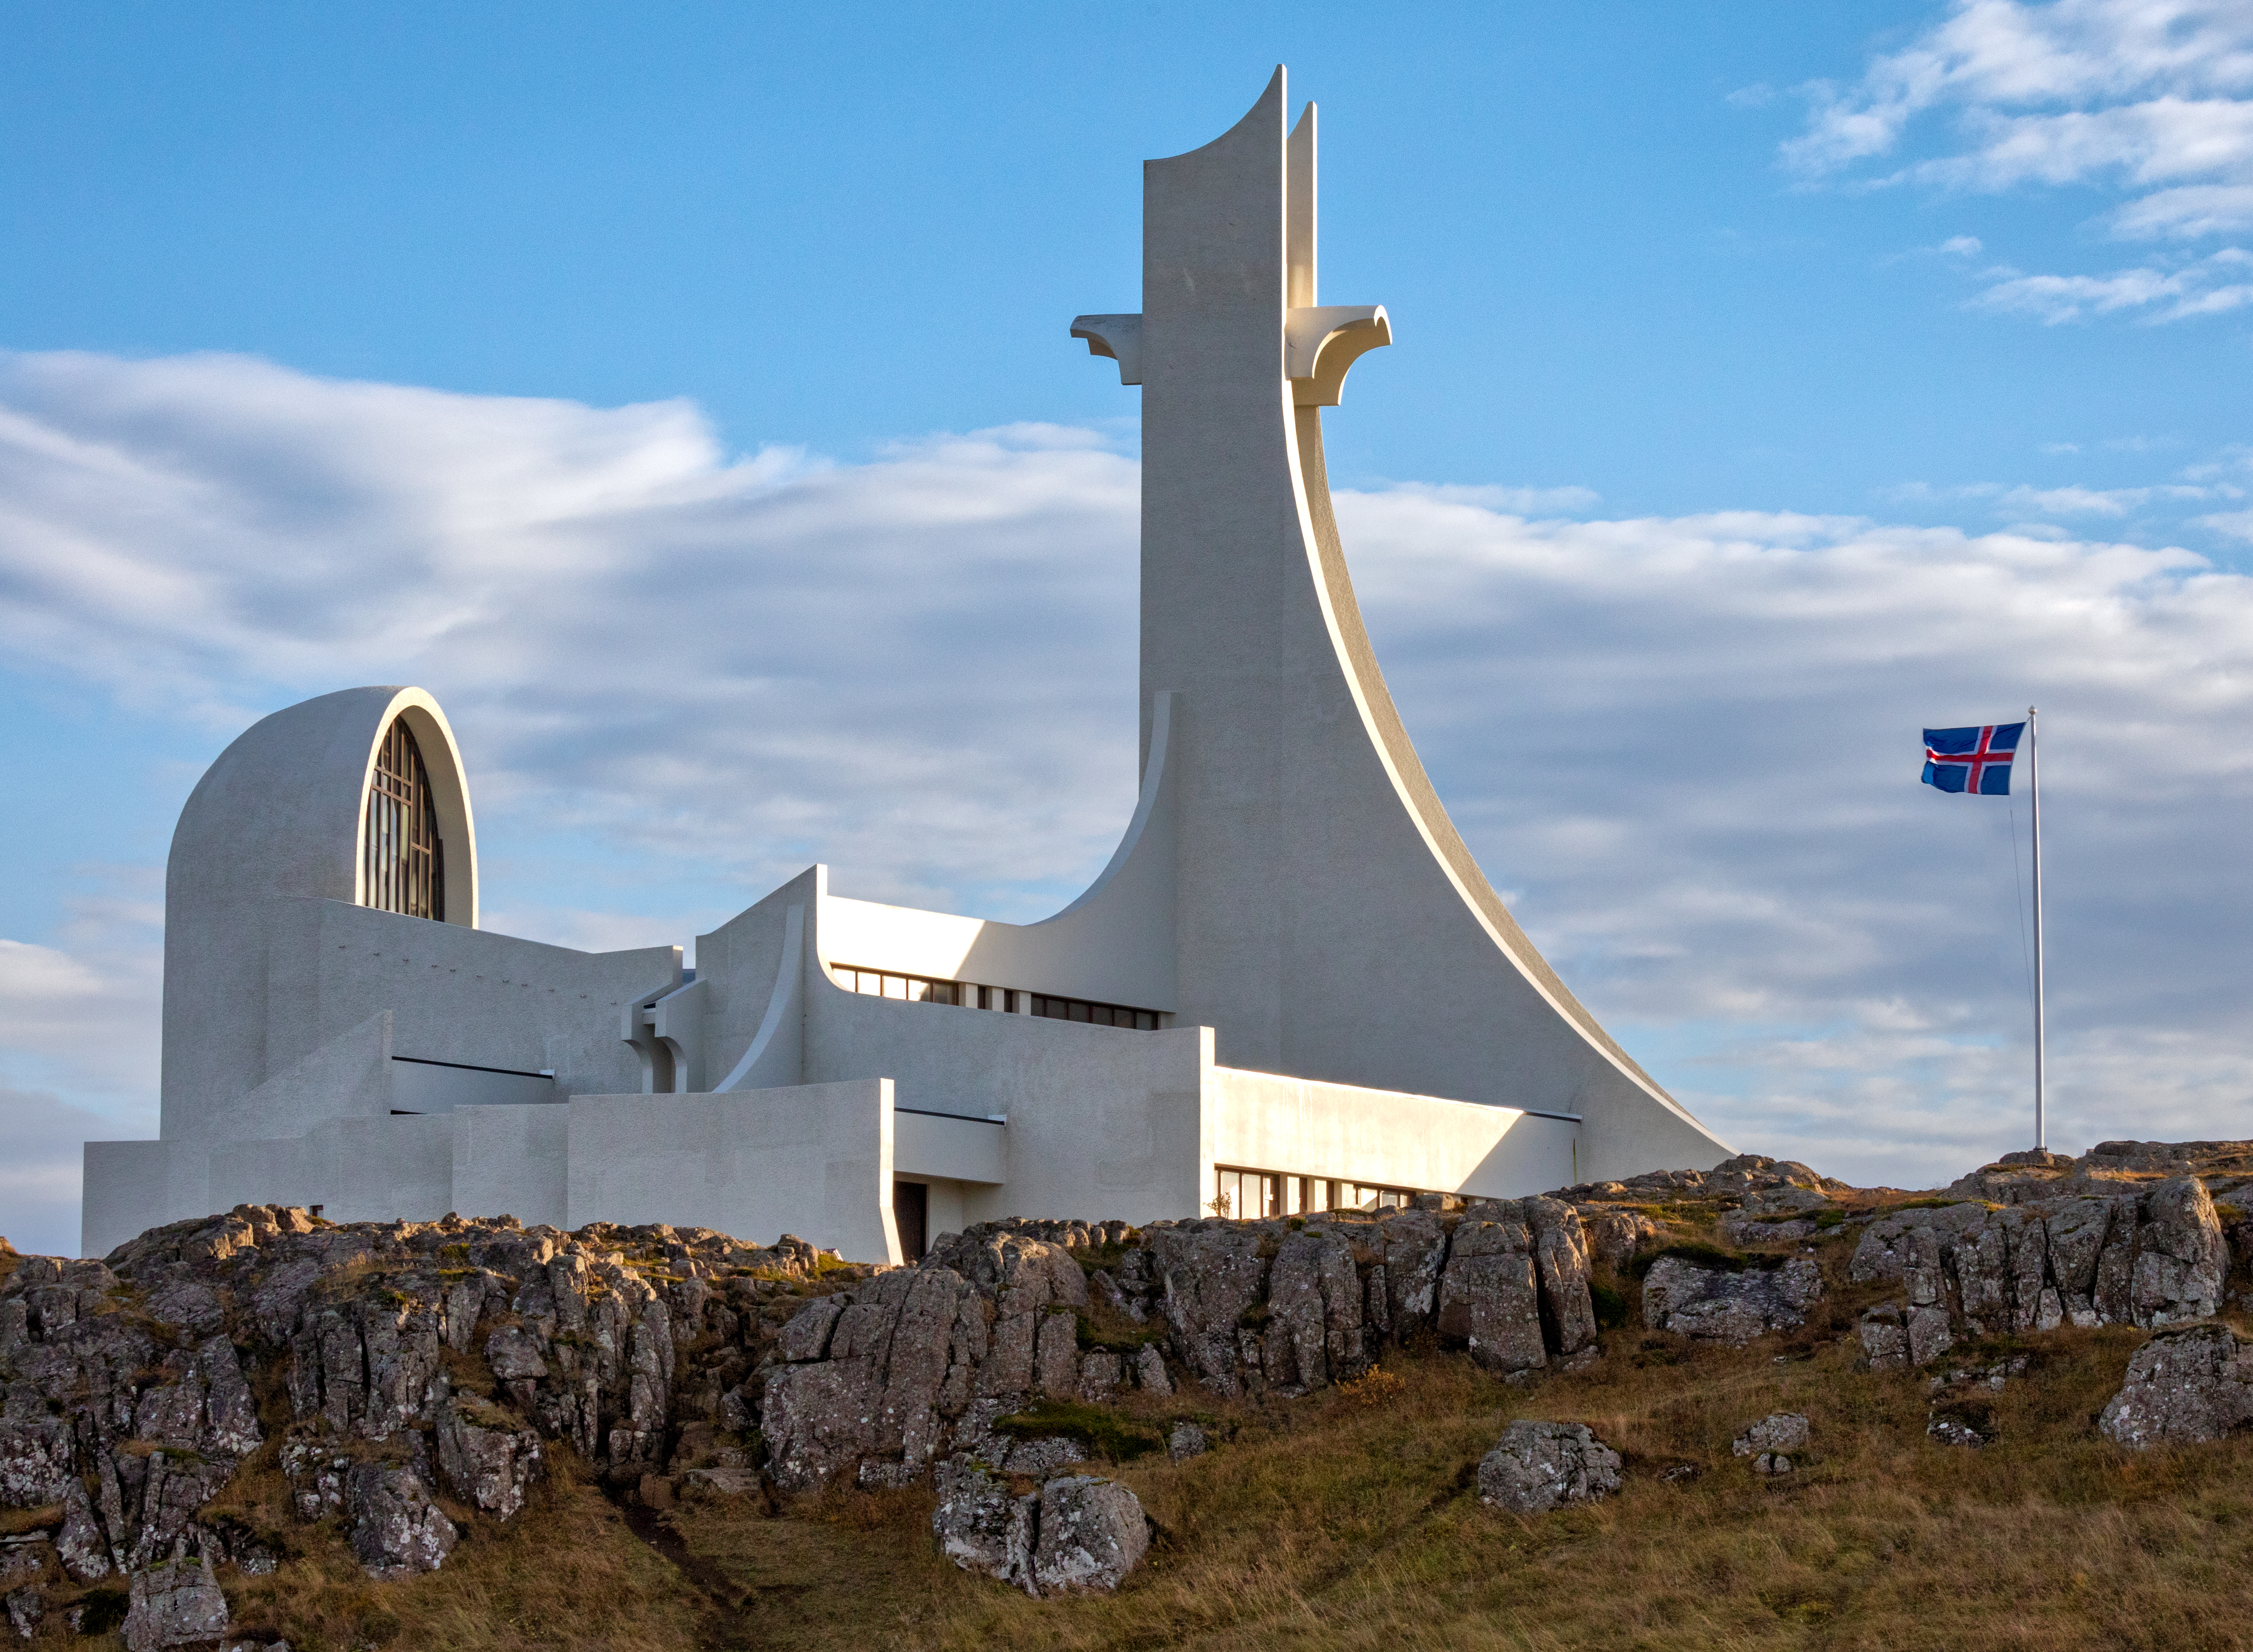 Stykkishólmur Church is a contemporary concrete structure built in 1980. It overlooking the town of Stykkishólmur in western Iceland, on the northern edge of Snæfellsnes peninsula.